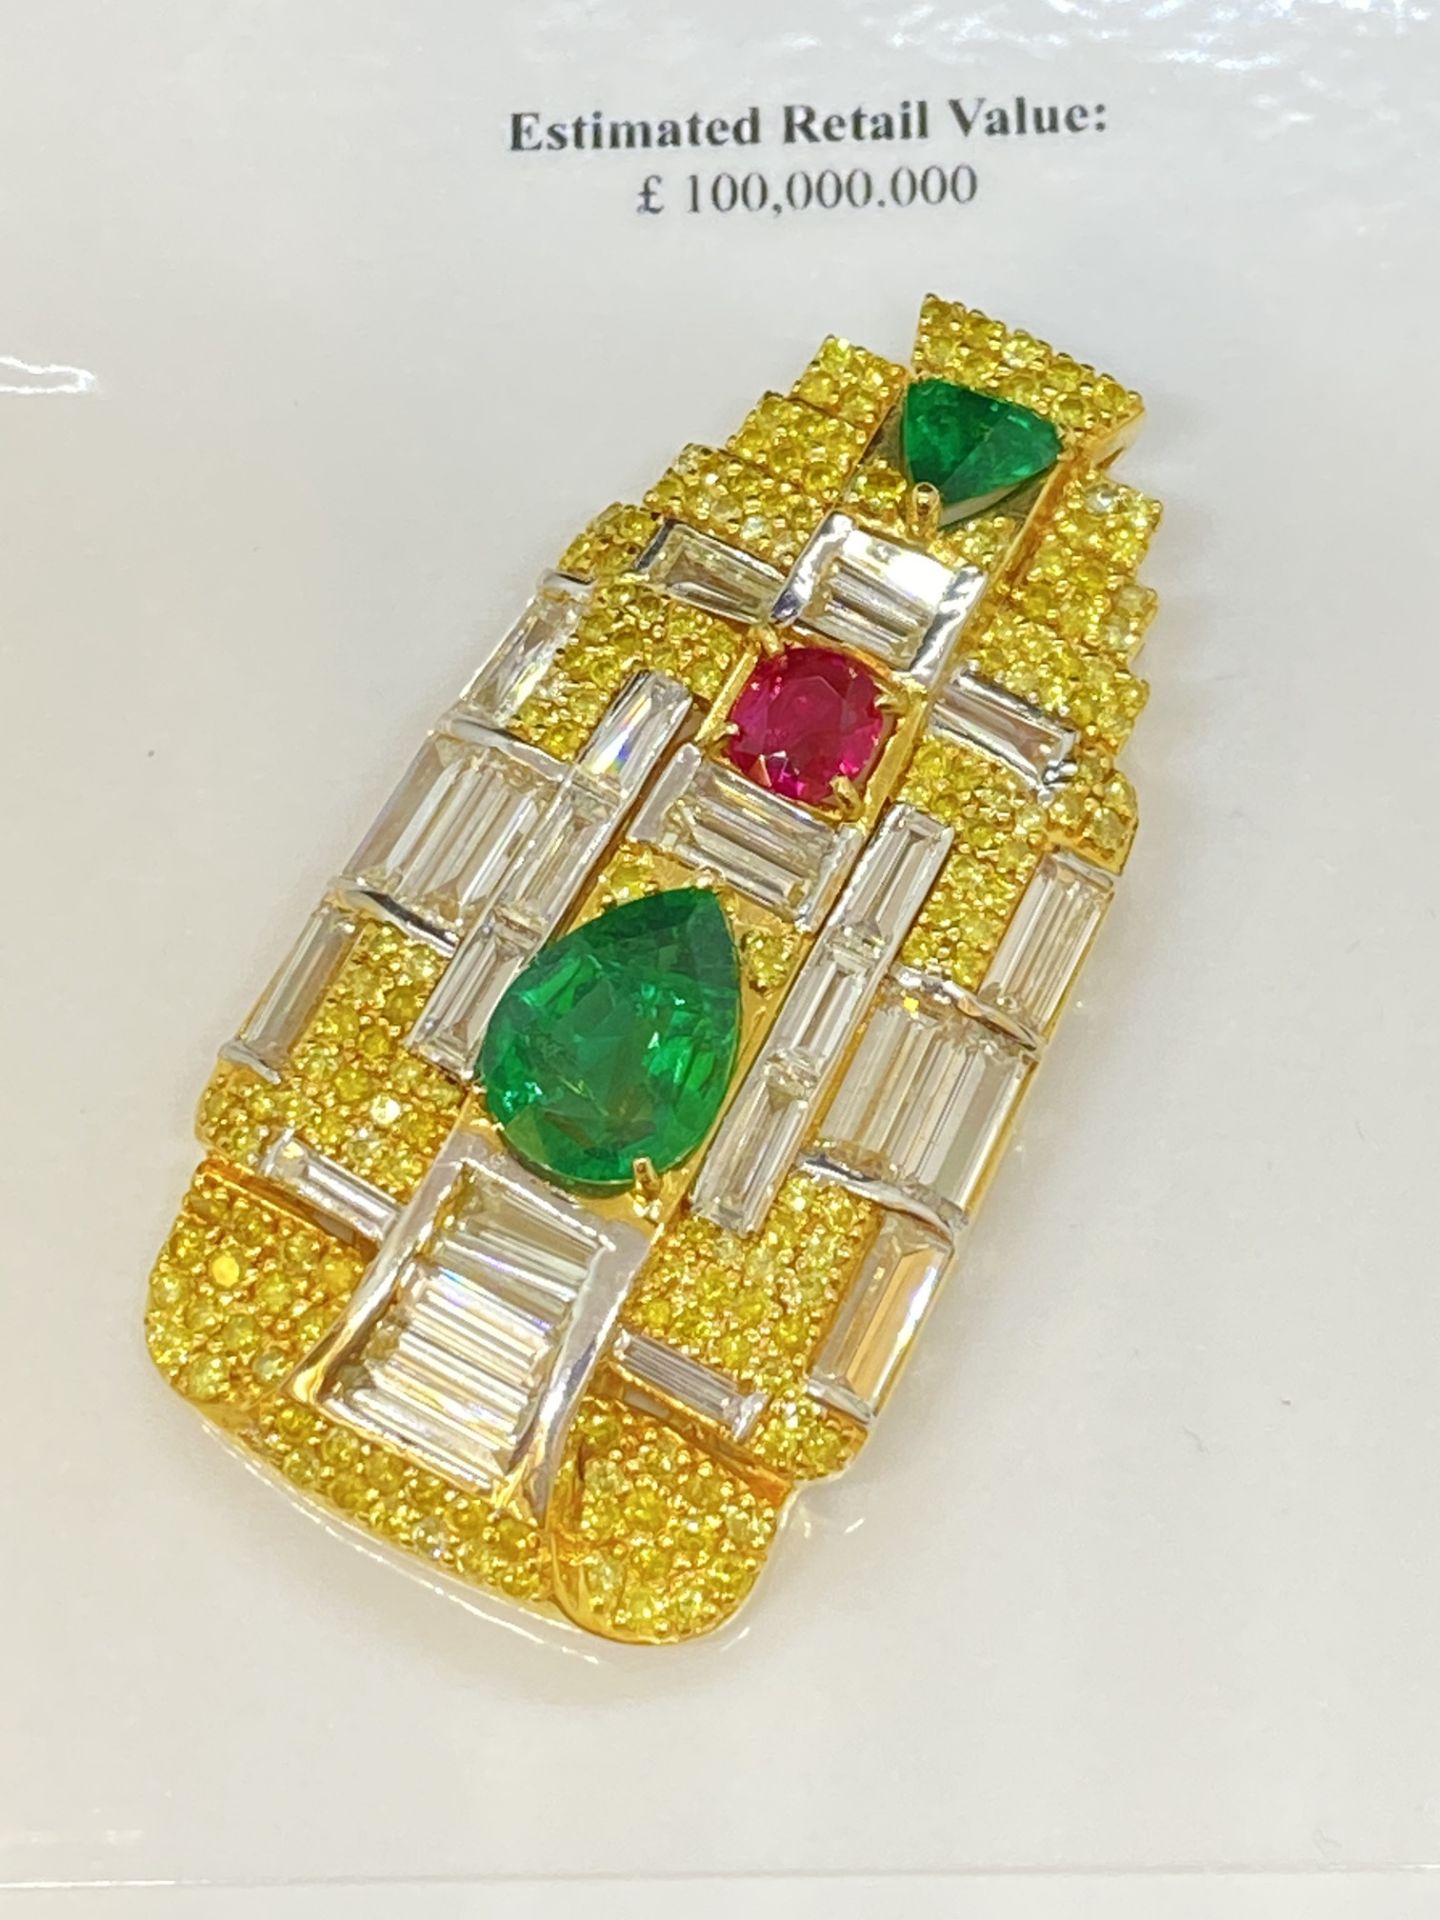 FINE DIAMOND, EMERALD & RUBY PENDANT WITH W.G.I £100,000 VALUATION - 30.9 GRAMS ** MUST SEE ** - Image 5 of 25